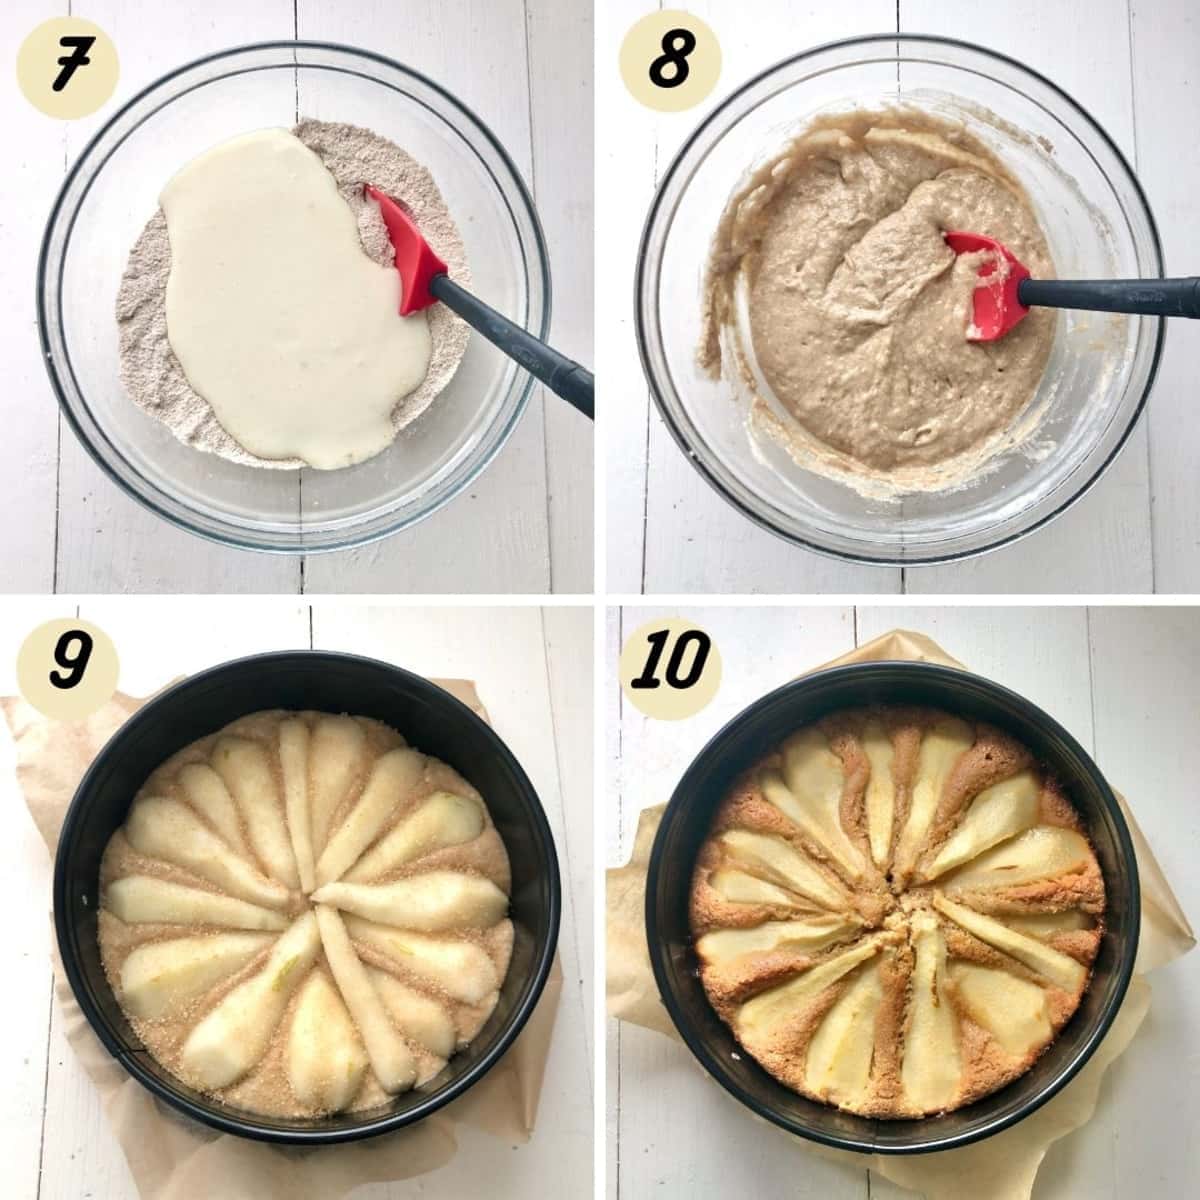 Mixing cake batter and cake before and after baking.